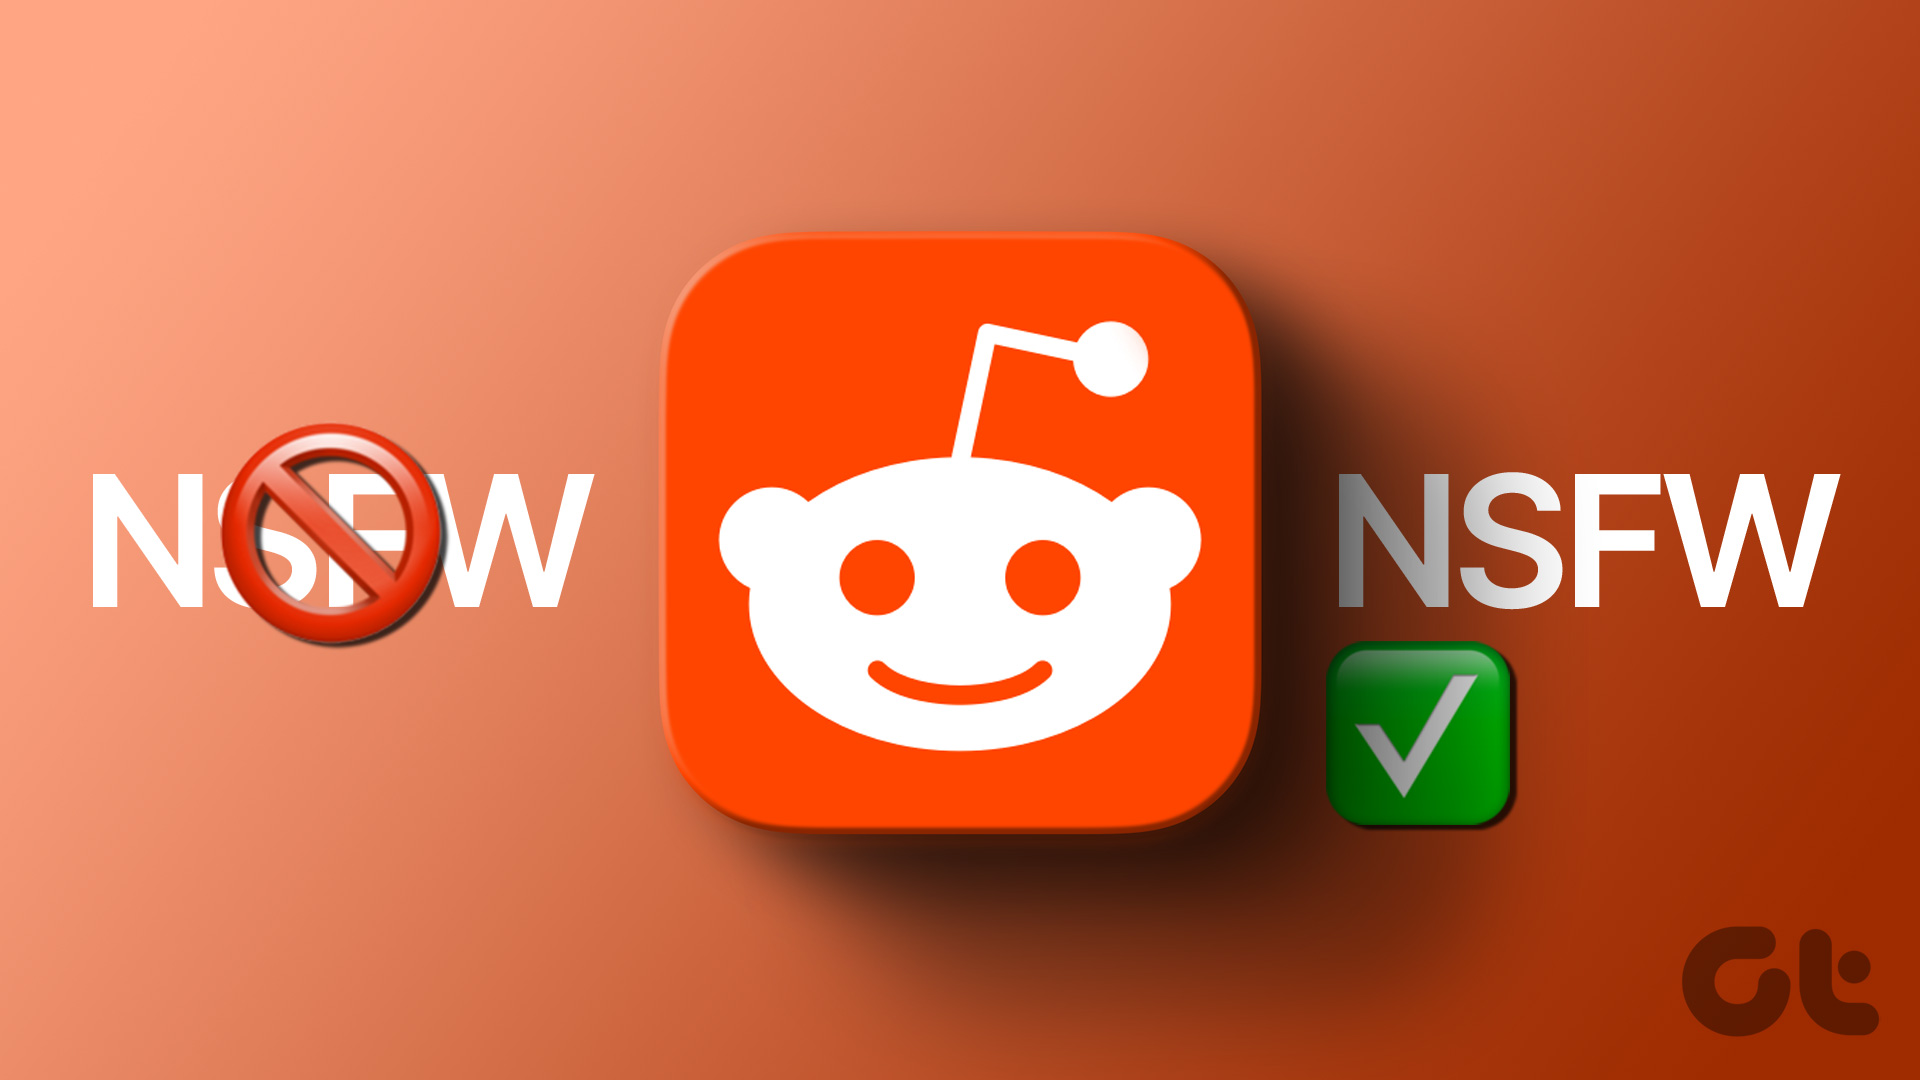 How to Enable NSFW on Reddit